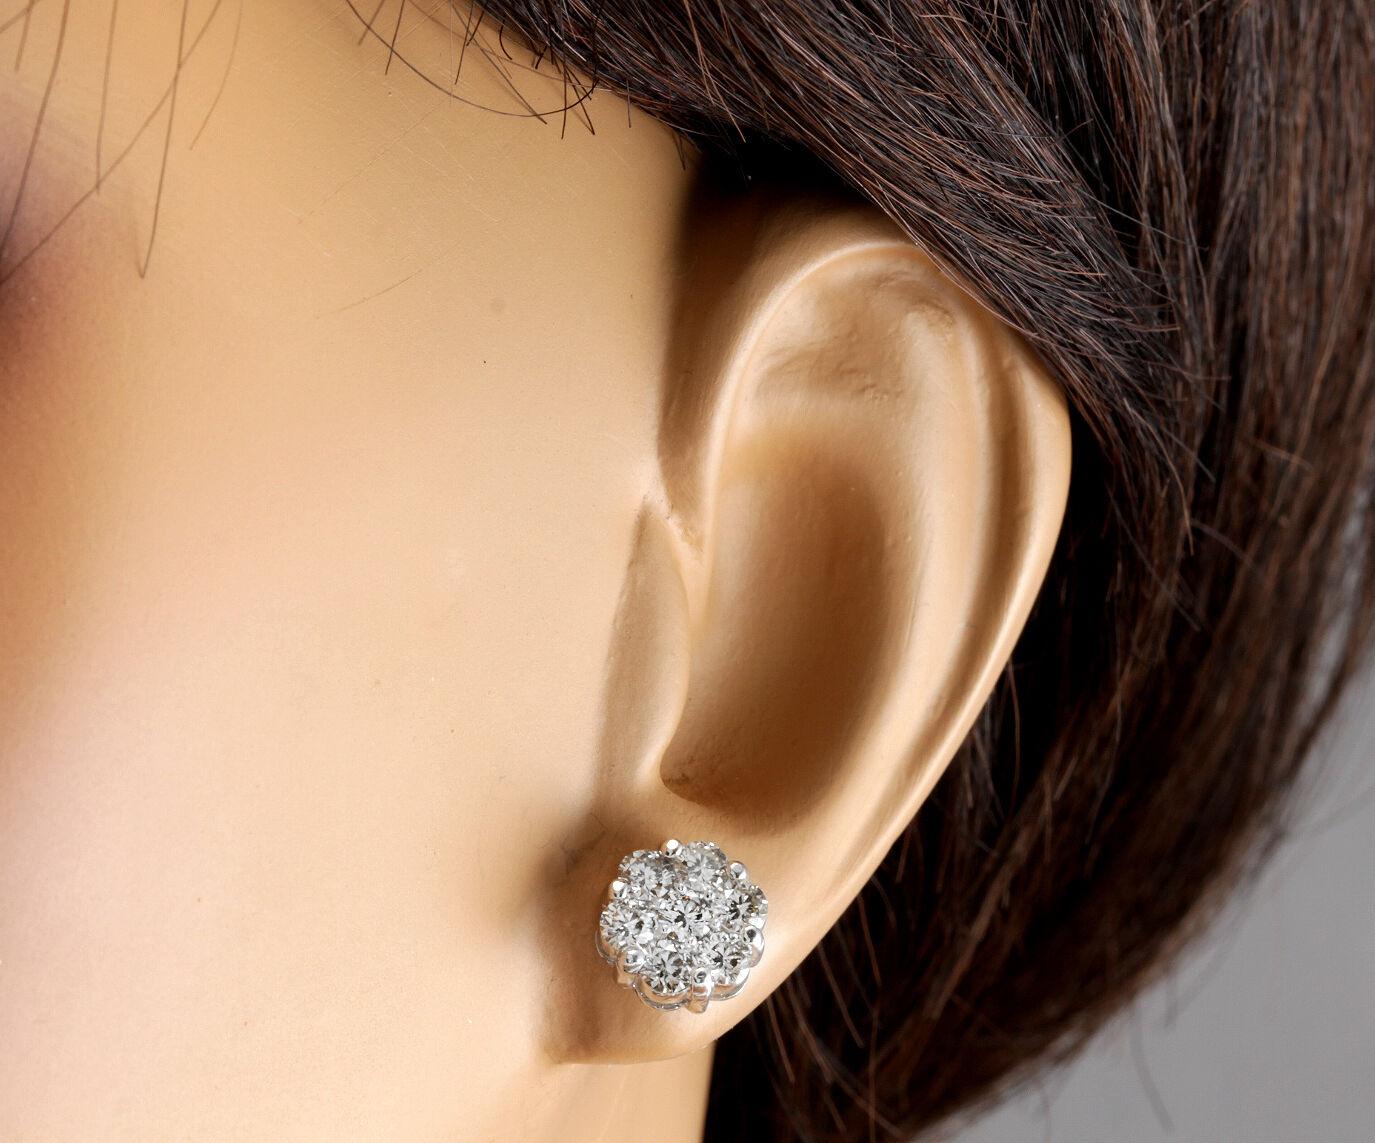 Exquisite 1.15 Carat Natural Diamond 14 Karat Solid White Gold Stud Earrings In New Condition For Sale In Los Angeles, CA